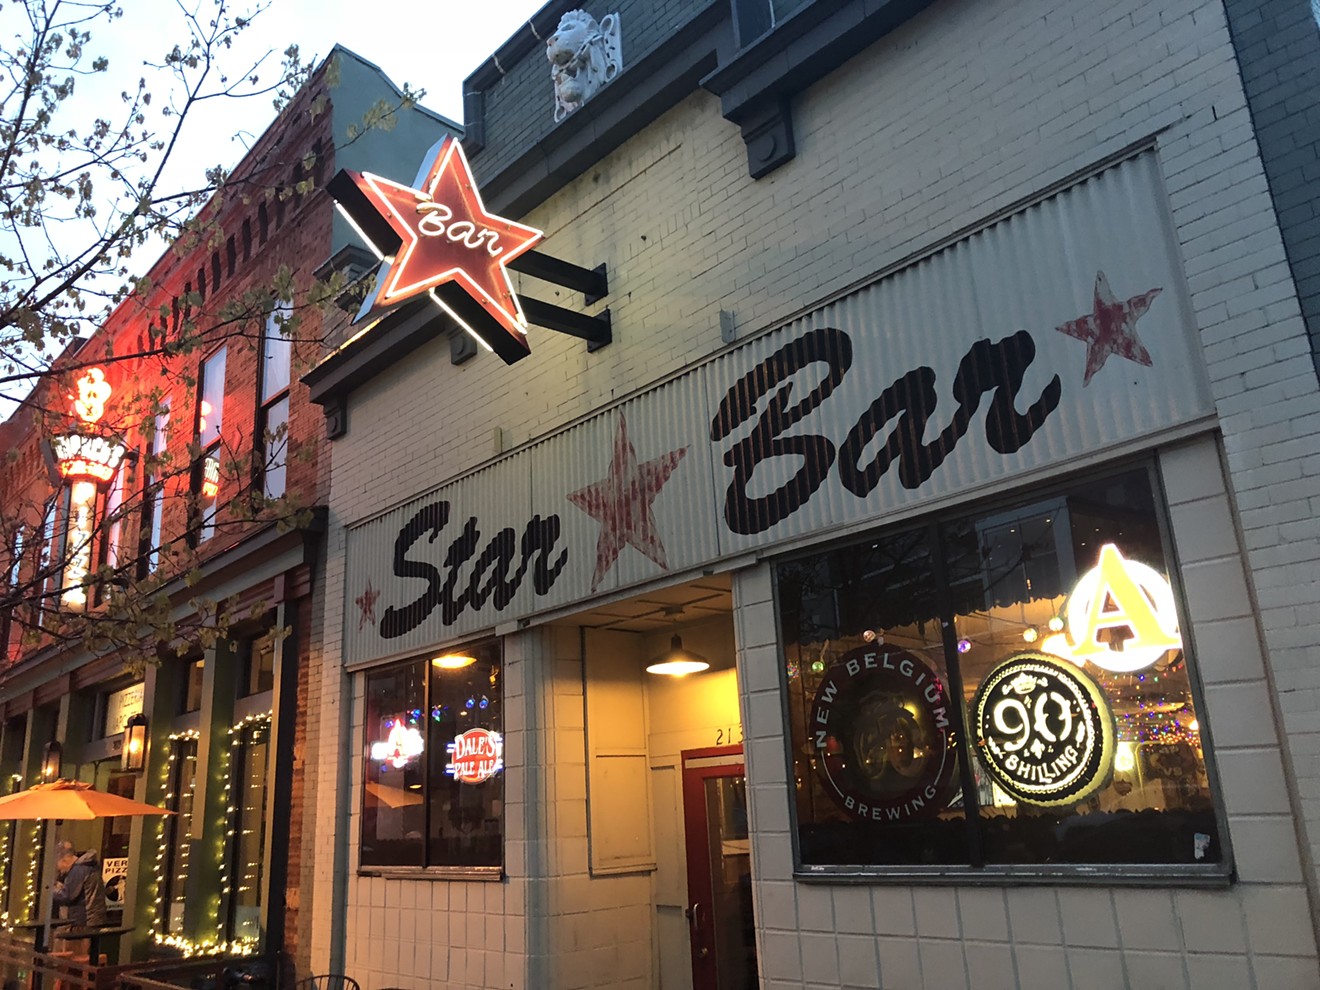 Star Bar might not stand out too much among the lights on Larimer Street, but it stands out to many as an oasis of neighborhood vibes in an area full of chain restaurants and tourists.